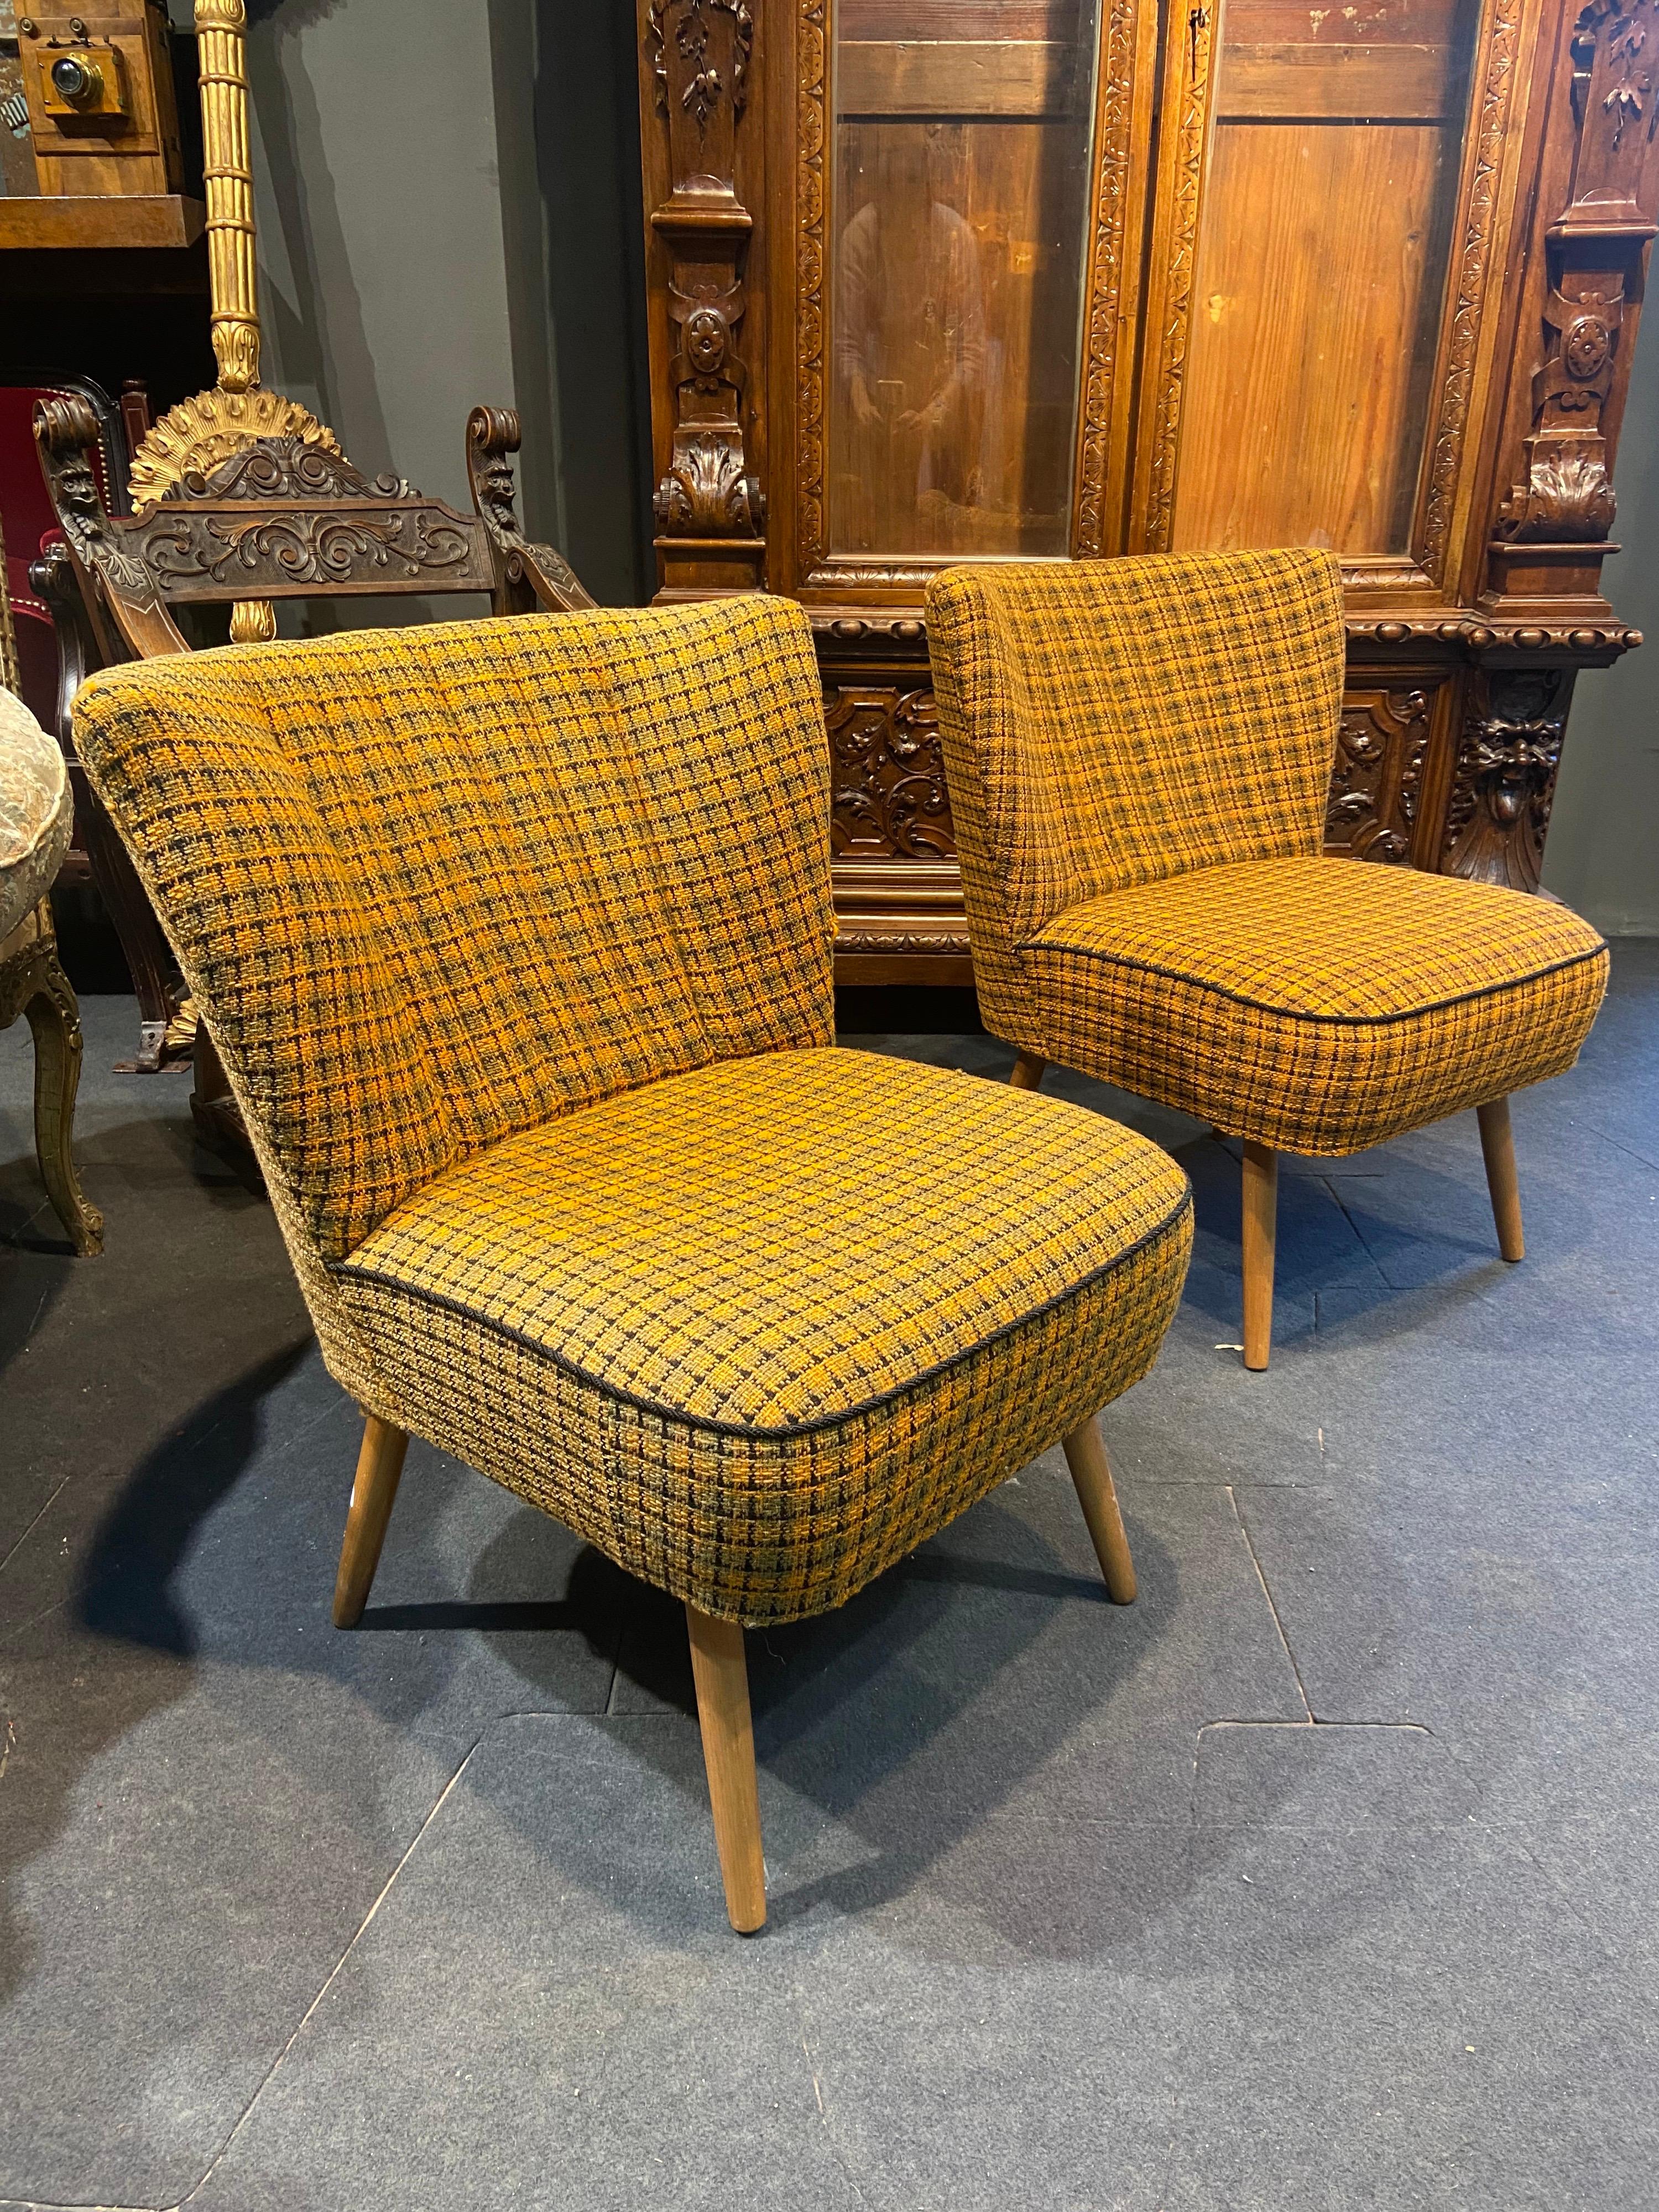 Nice French pair of vintage low chairs in mustard plaid upholstery. Both are raised on small wooden legs and are very comfortable and could be a beautiful accent in any living room.
France, circa 1950.